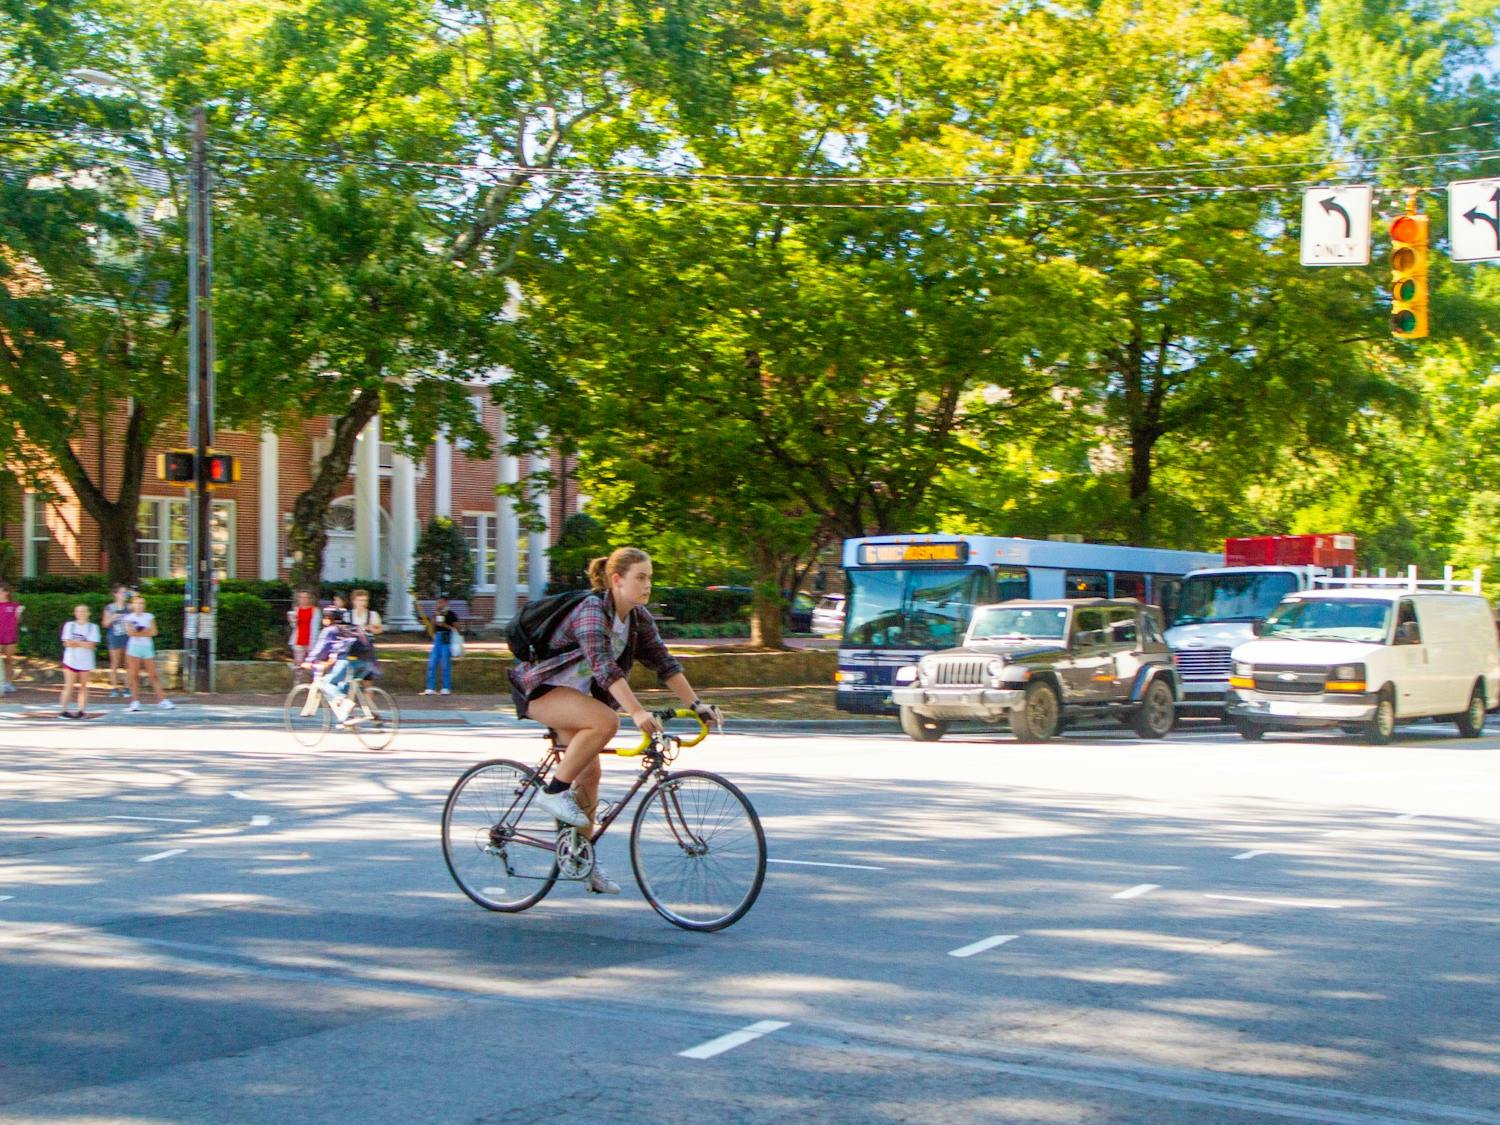 A cyclist heads toward the UNC-CH campus at the intersection of Cameron Ave. and S. Columbia St. on the afternoon of Sept. 27th.